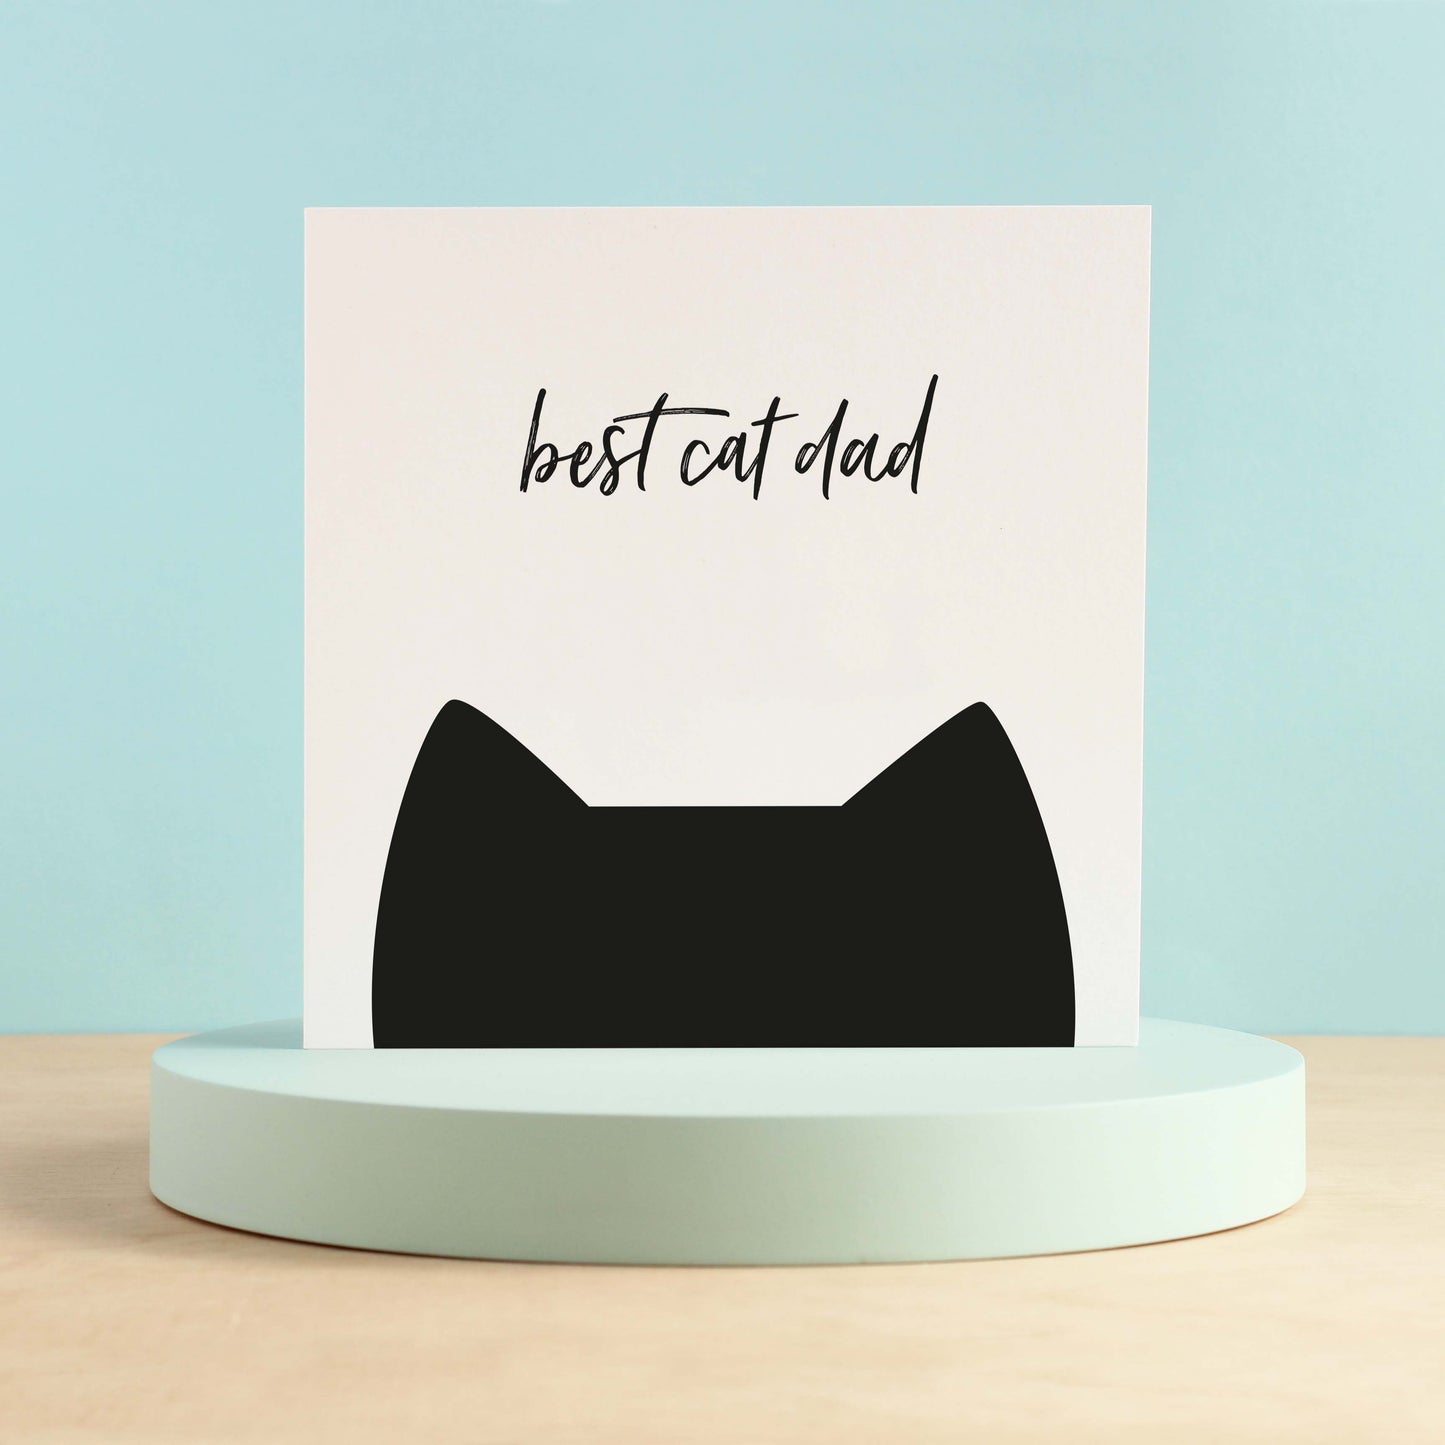 Best cat dad card from Purple Tree Designs